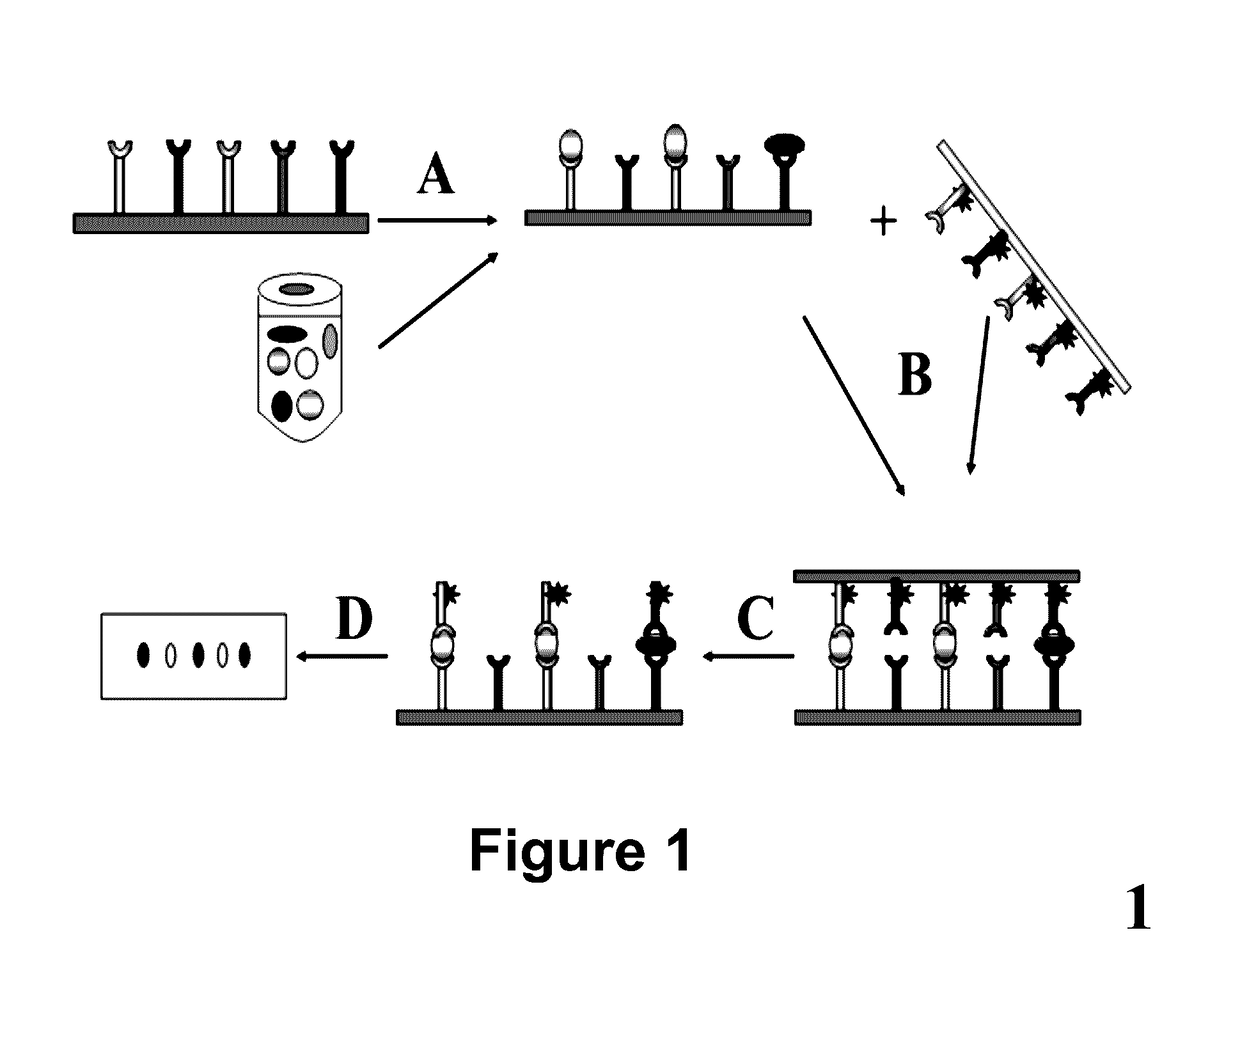 Method for High-throughput Protein Detection with Two Antibody Microarrays